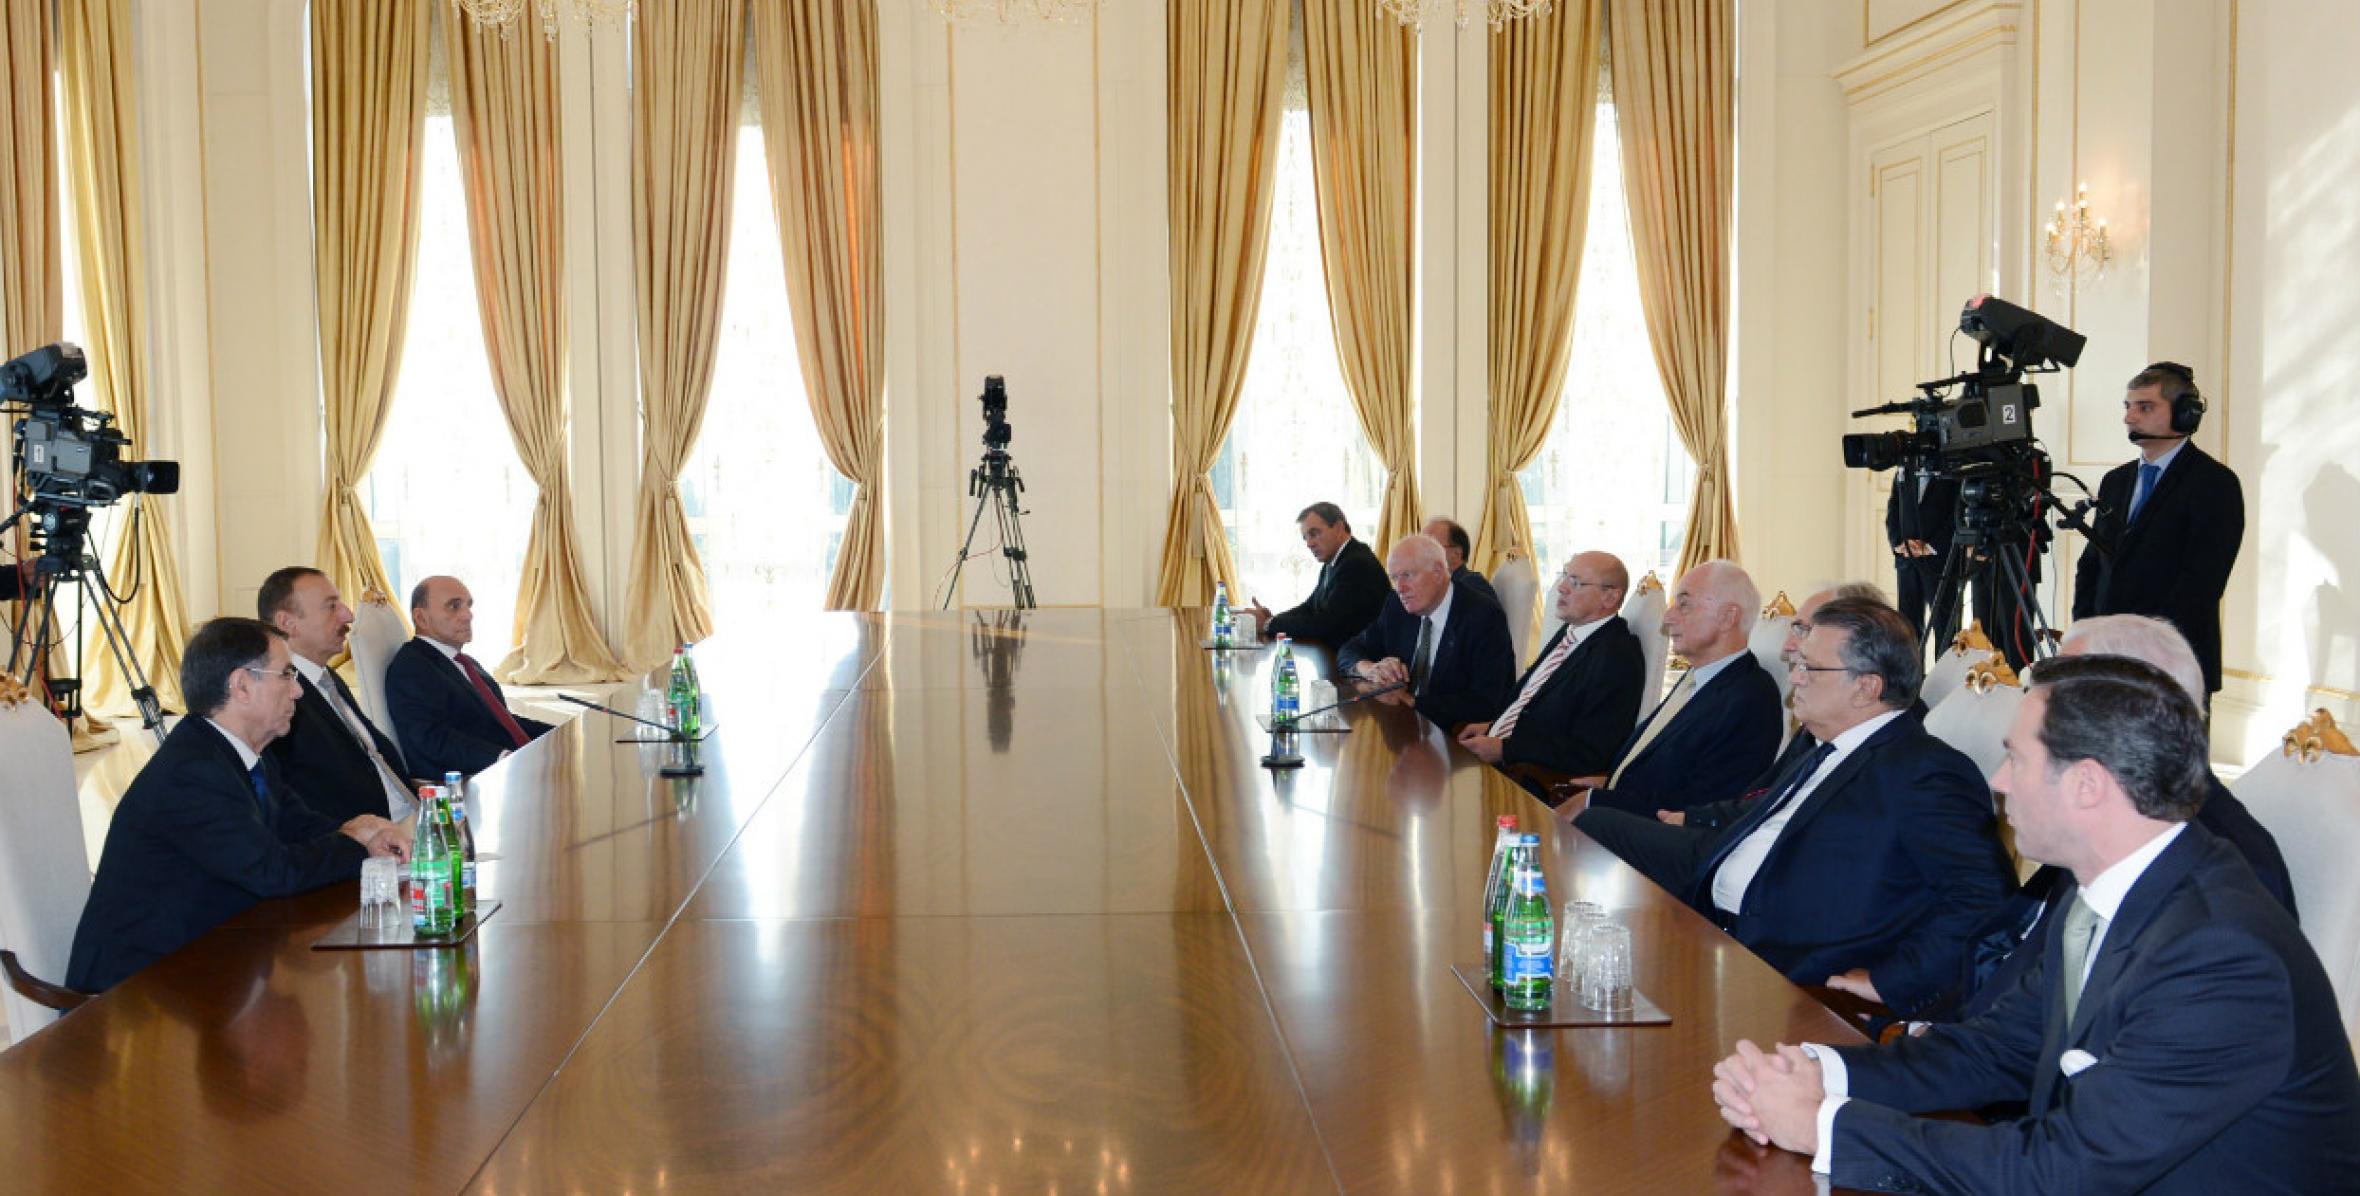 Ilham Aliyev received the participants of the “Building Bridges” international conference being held in Baku